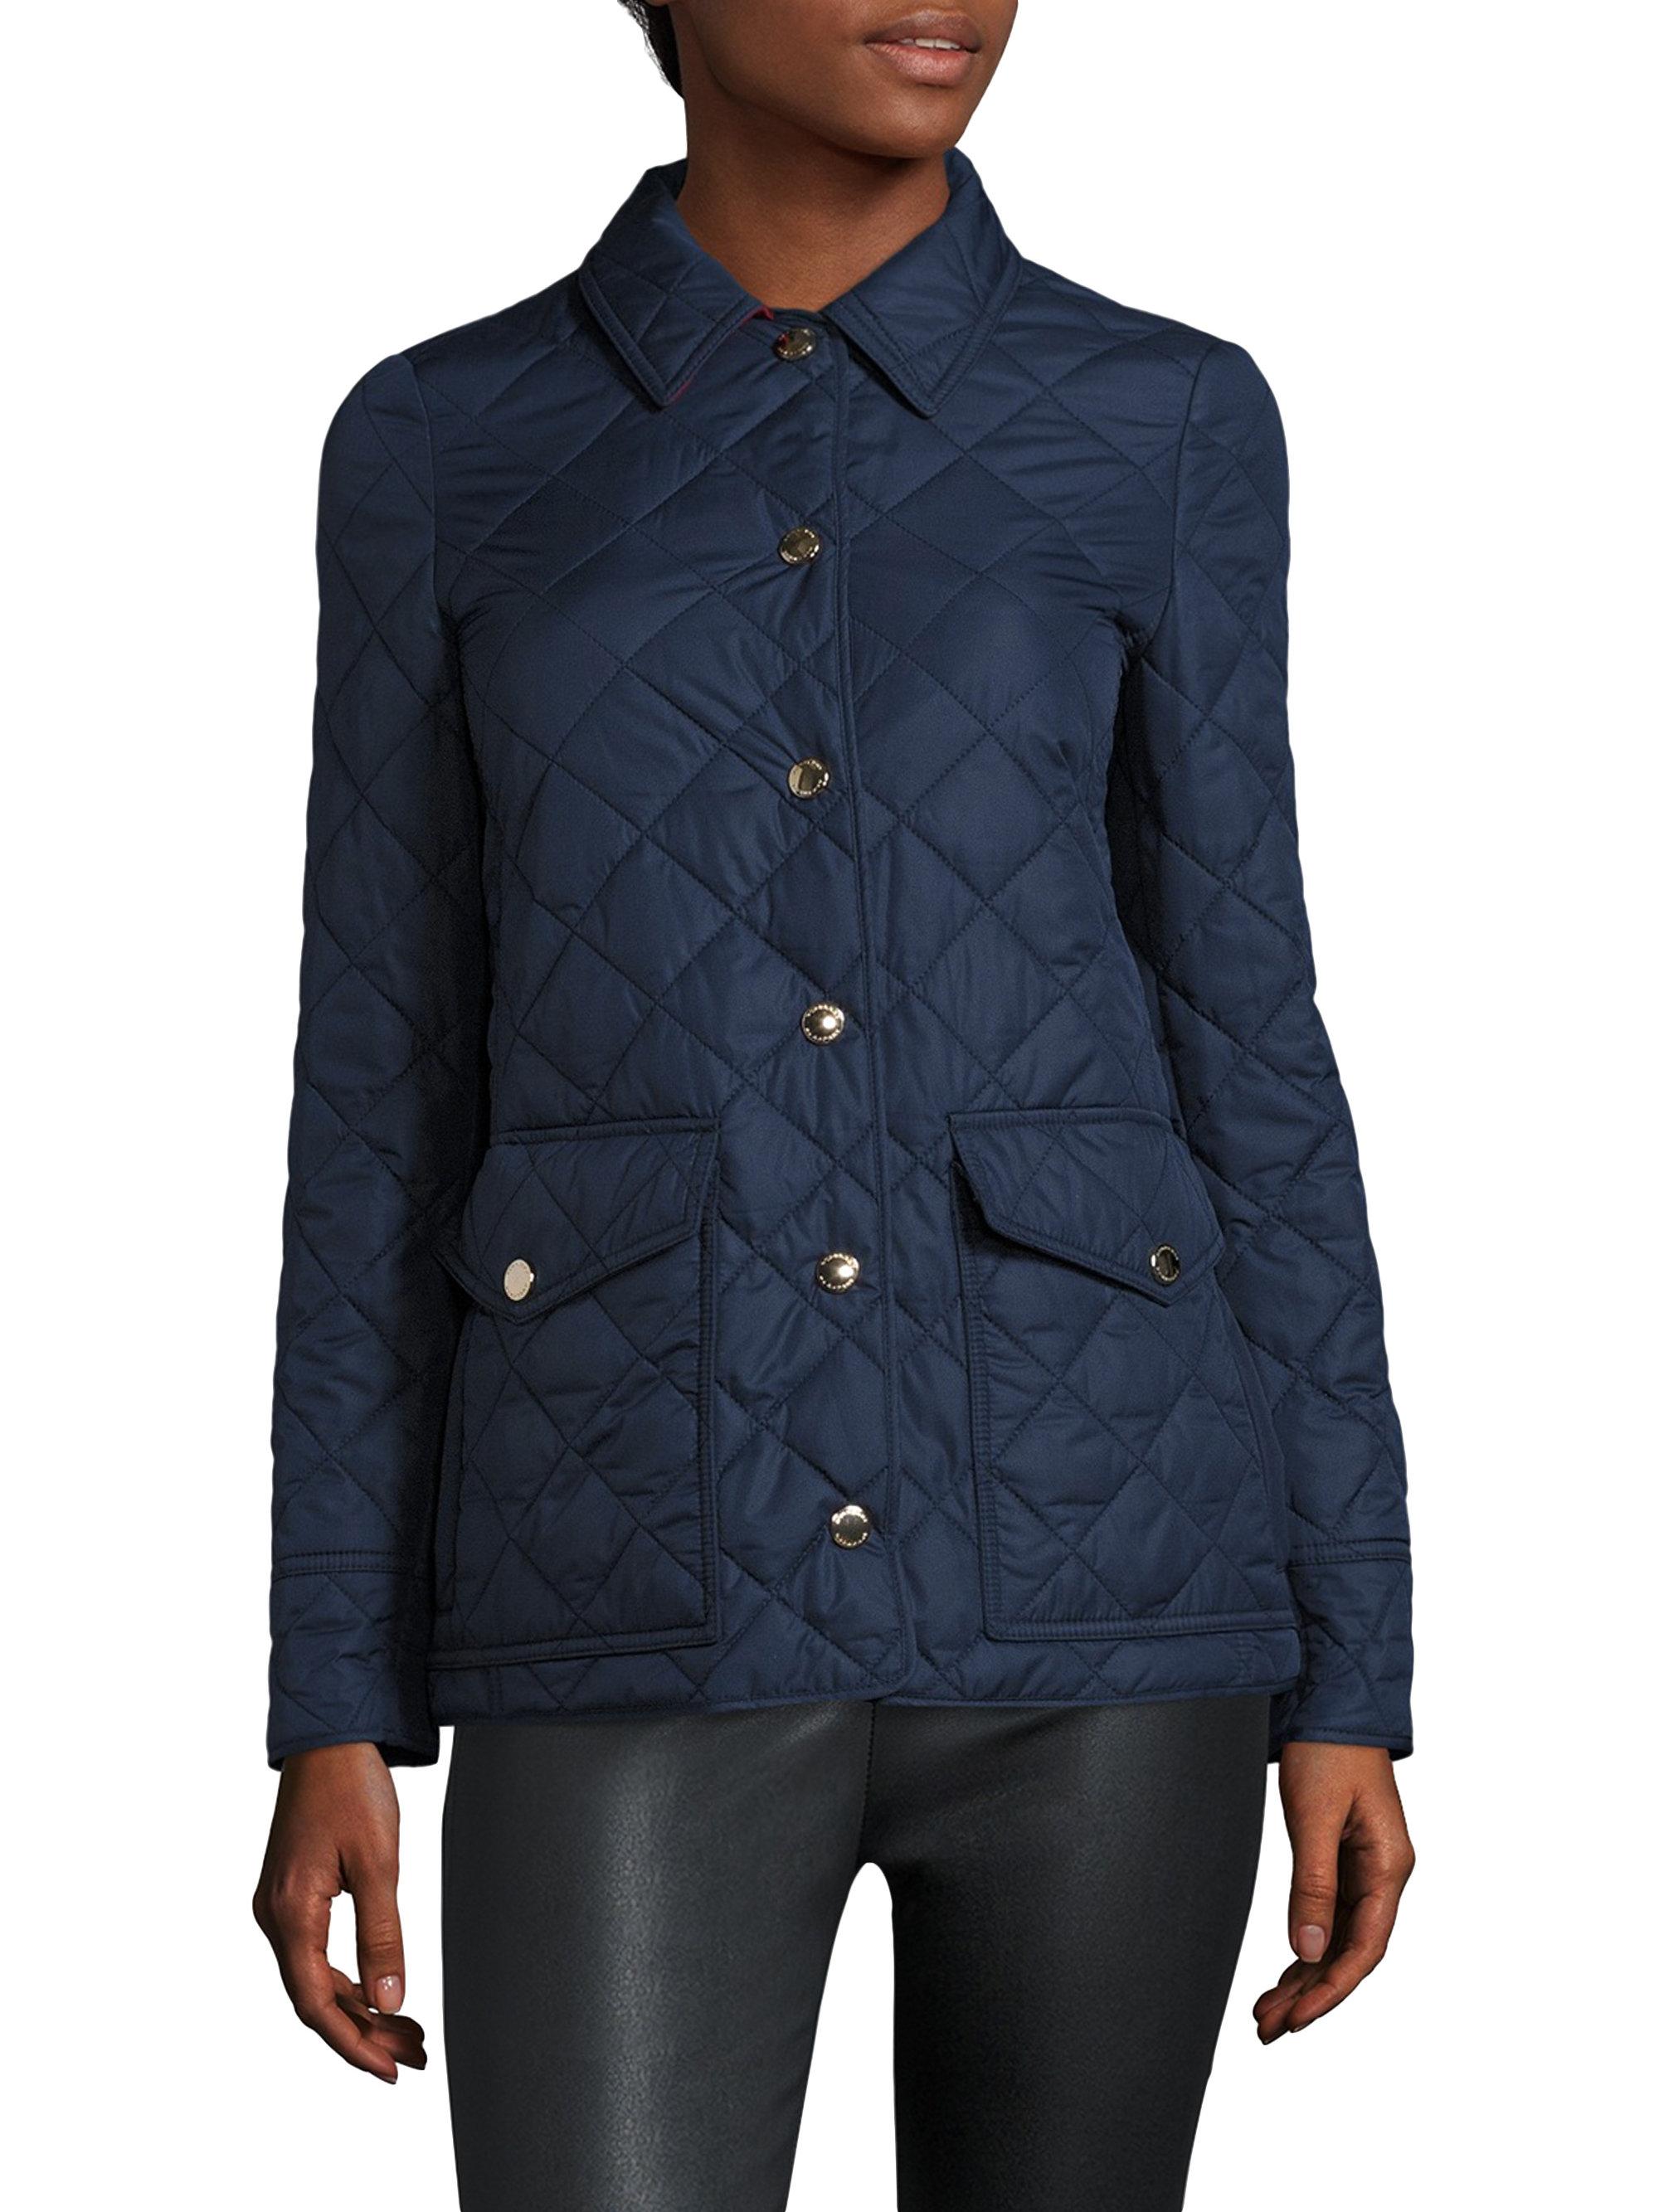 Lyst - Burberry Quilted Snap Button Jacket in Blue